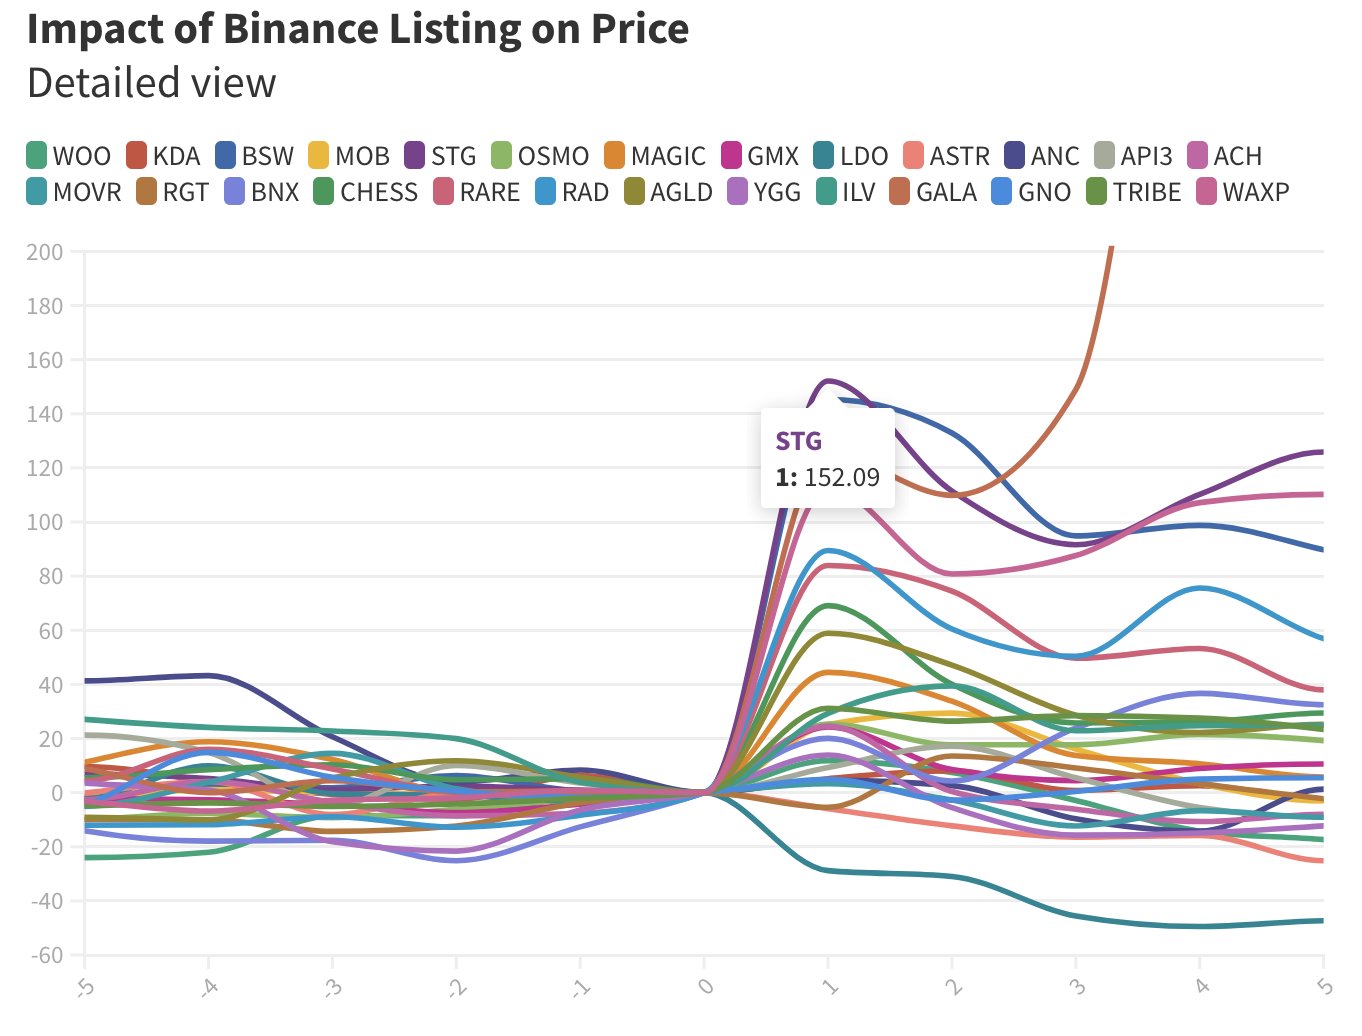 Prime Altcoins With 50x Potential Not On Binance: Crypto Analyst